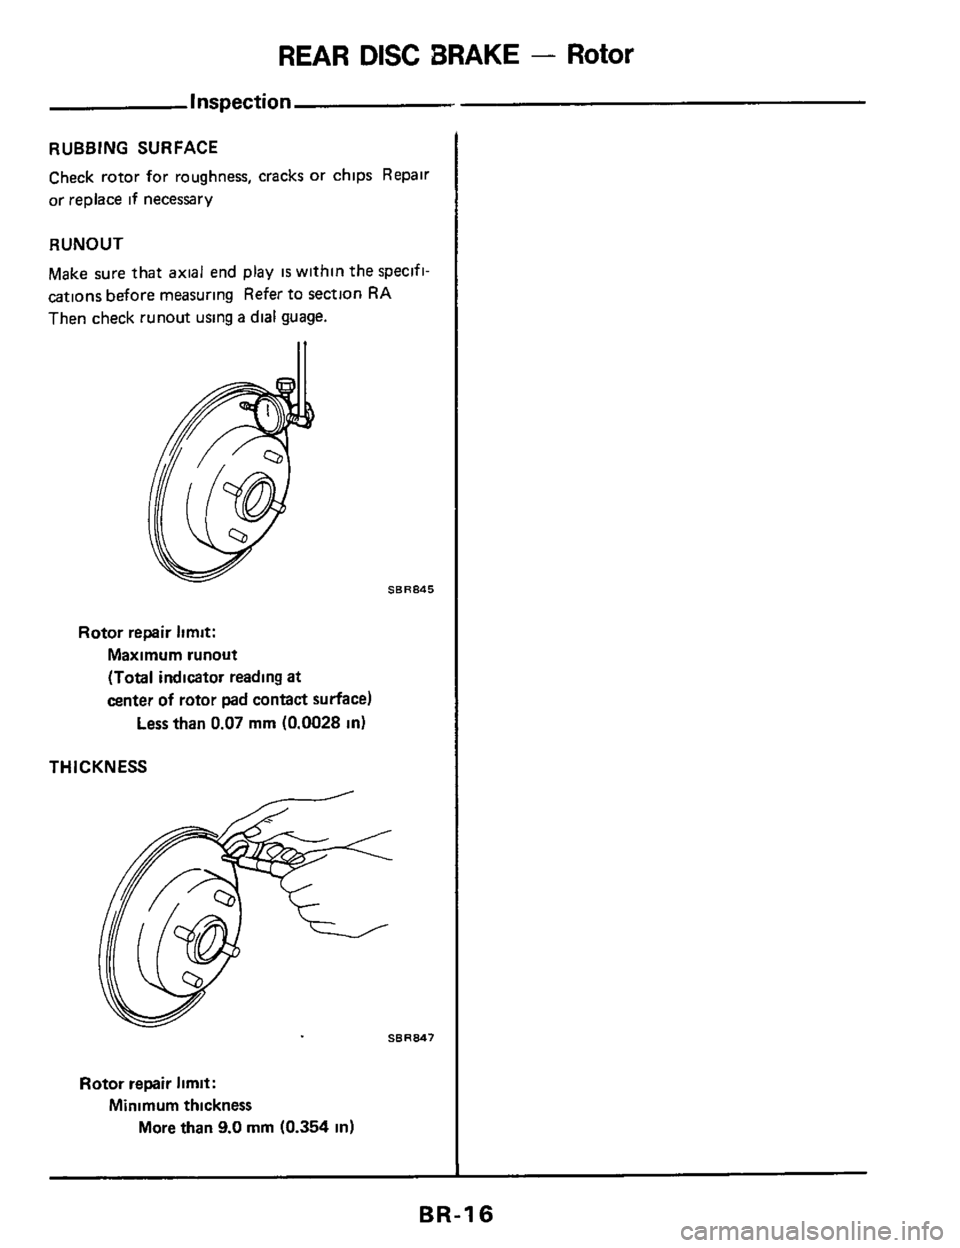 NISSAN 300ZX 1984 Z31 Brake System User Guide REAR DISC BRAKE - Rotor 
Inspection 
RUBBING SURFACE 
Check rotor for  roughness,  cracks or chips  Repair 
or  replace  if necessary 
RUNOUT 
Make  sure  that axial  end play IS within  the specifi- 